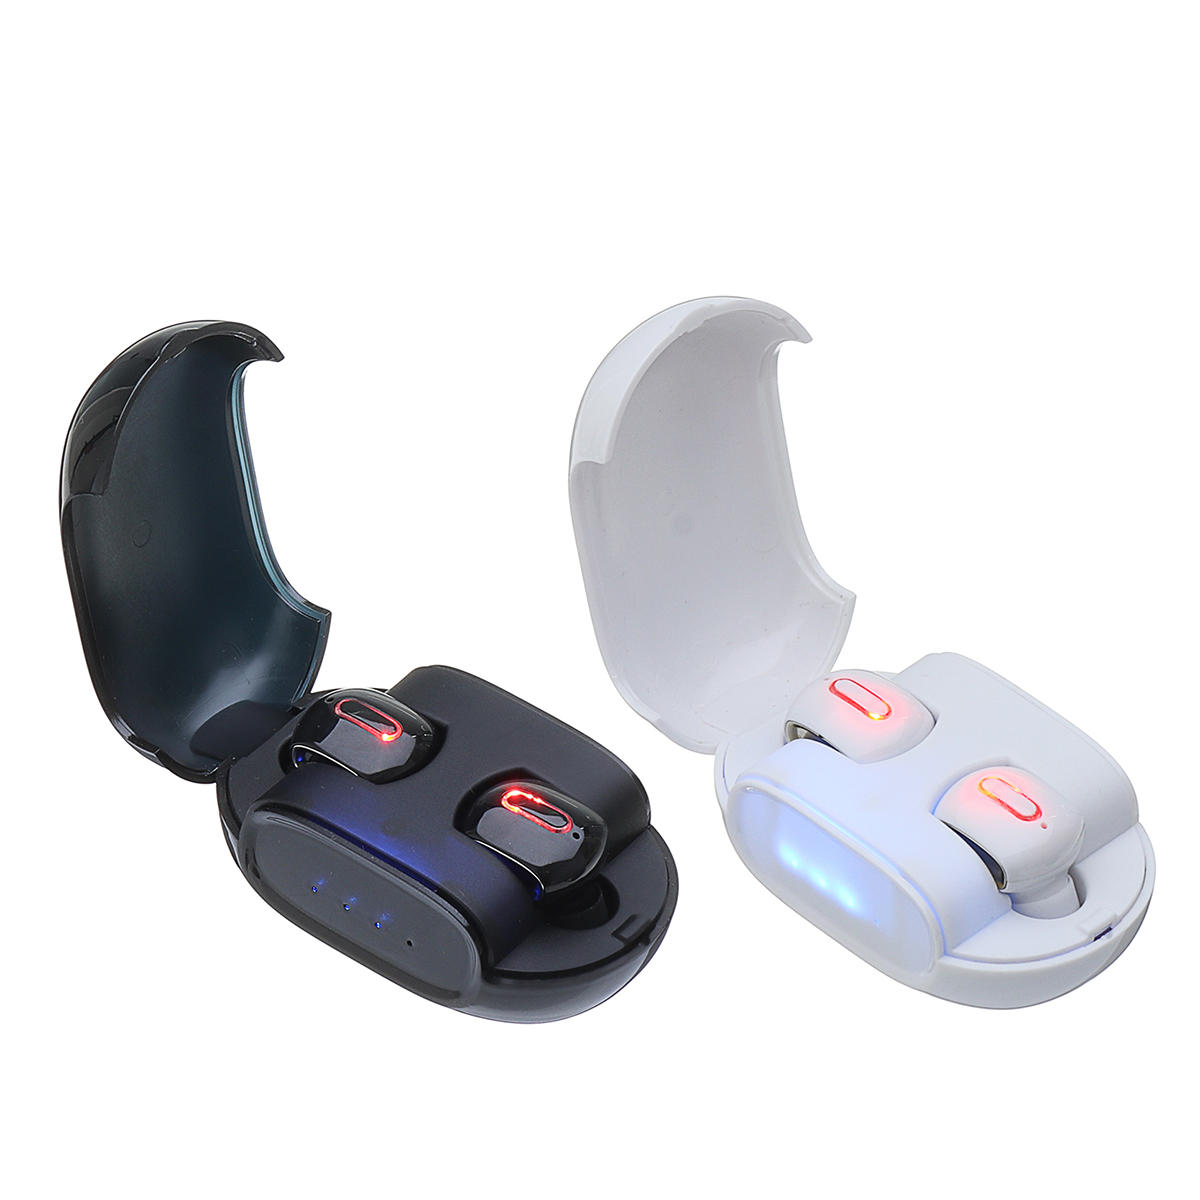 

Mini Dual bluetooth 5.0 Headset Smart Touch Binaural Call IPX5 Waterproof TWS Stereo Wireless Earphone for IOS Android